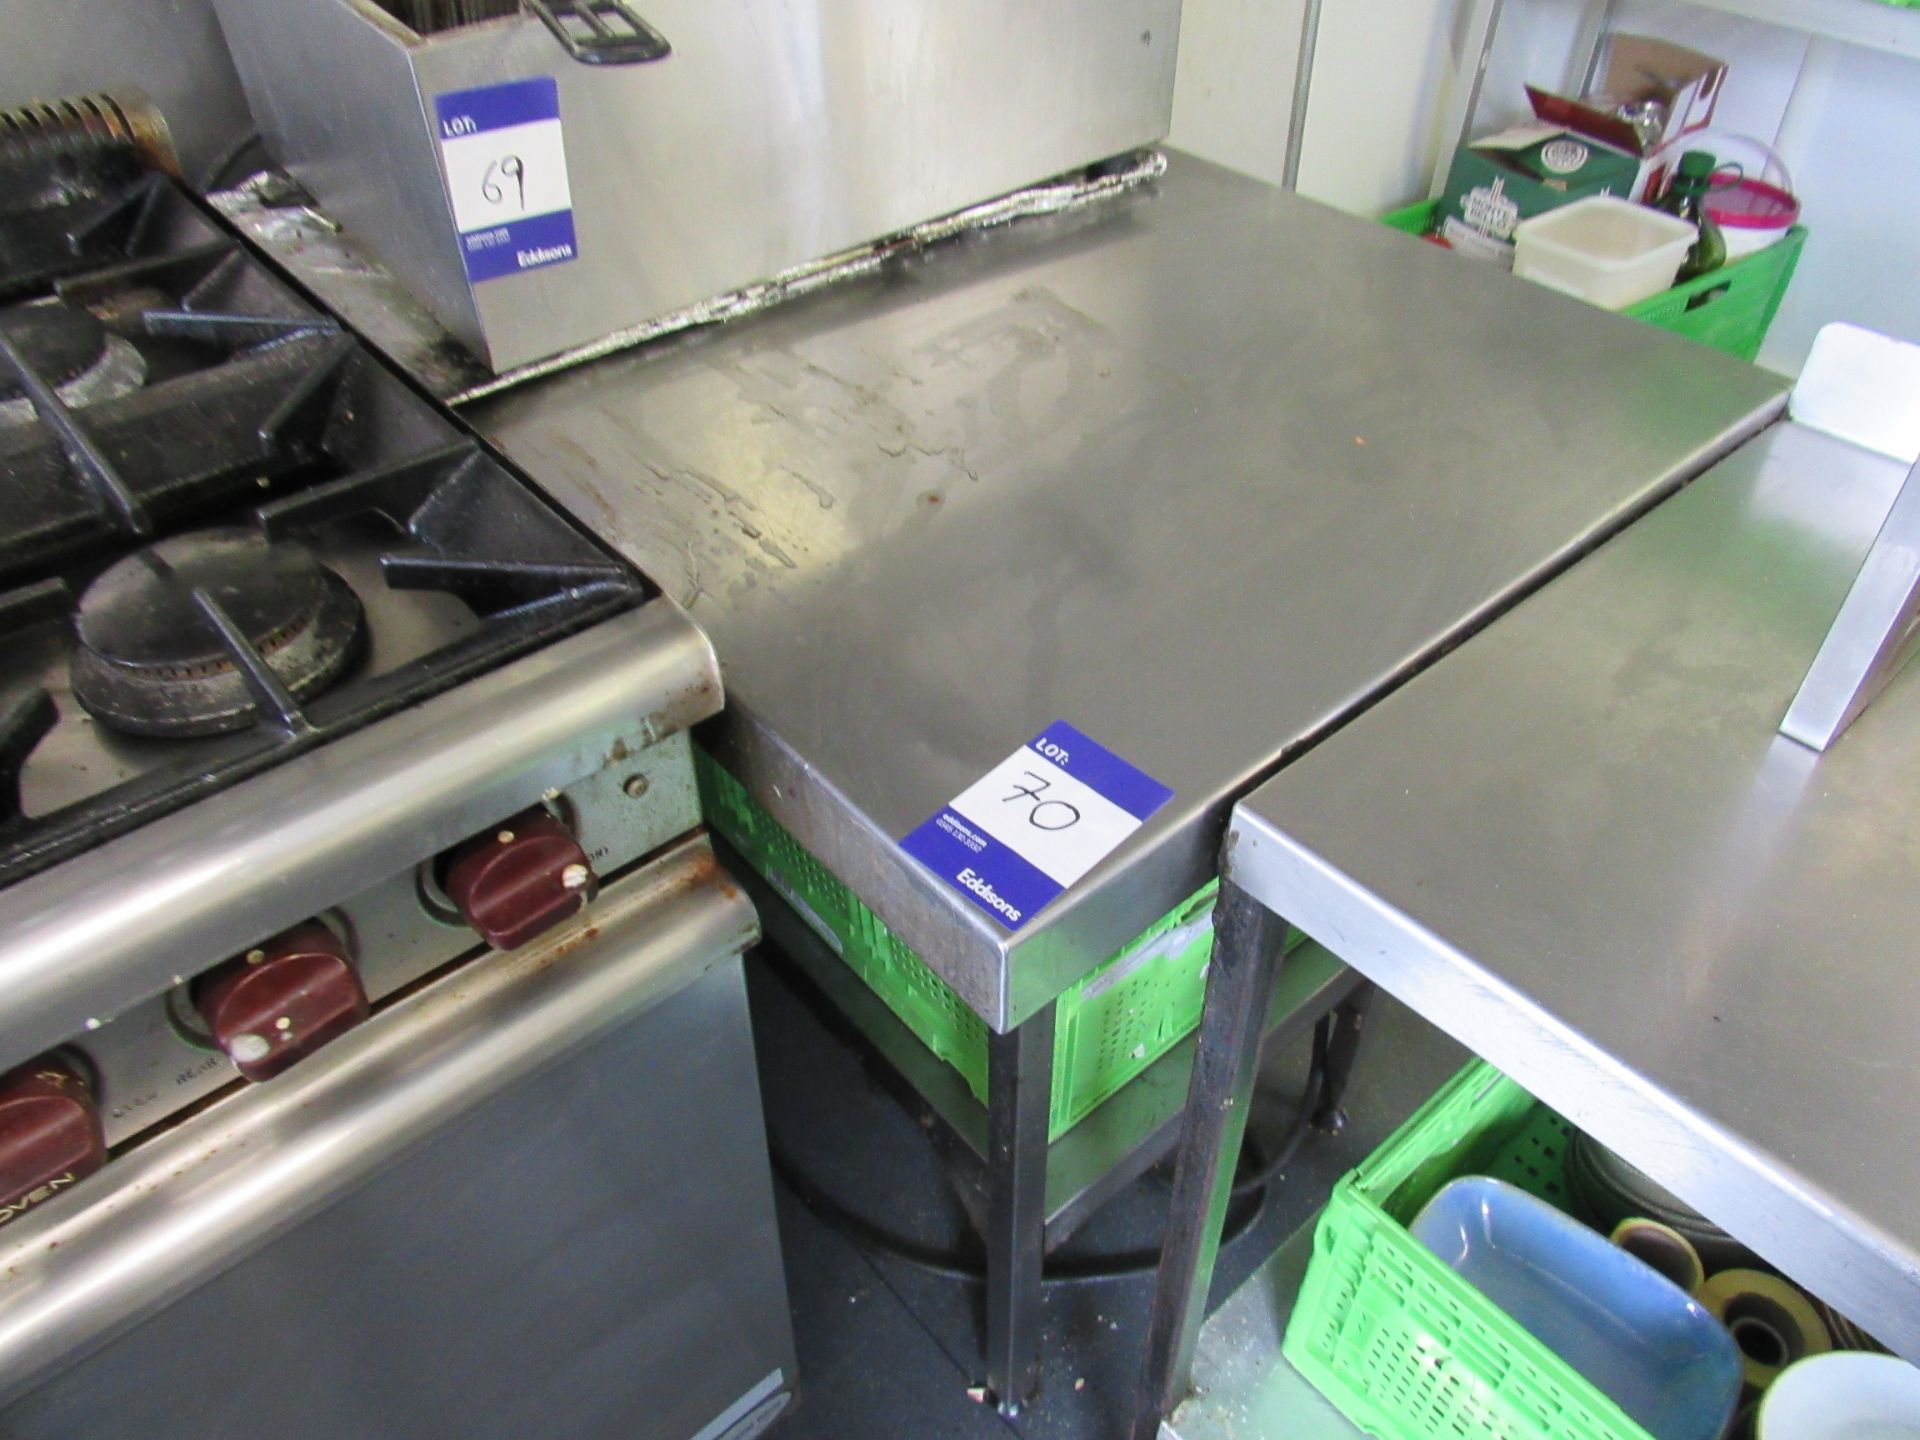 Stainless steel topped prep table with undershelf